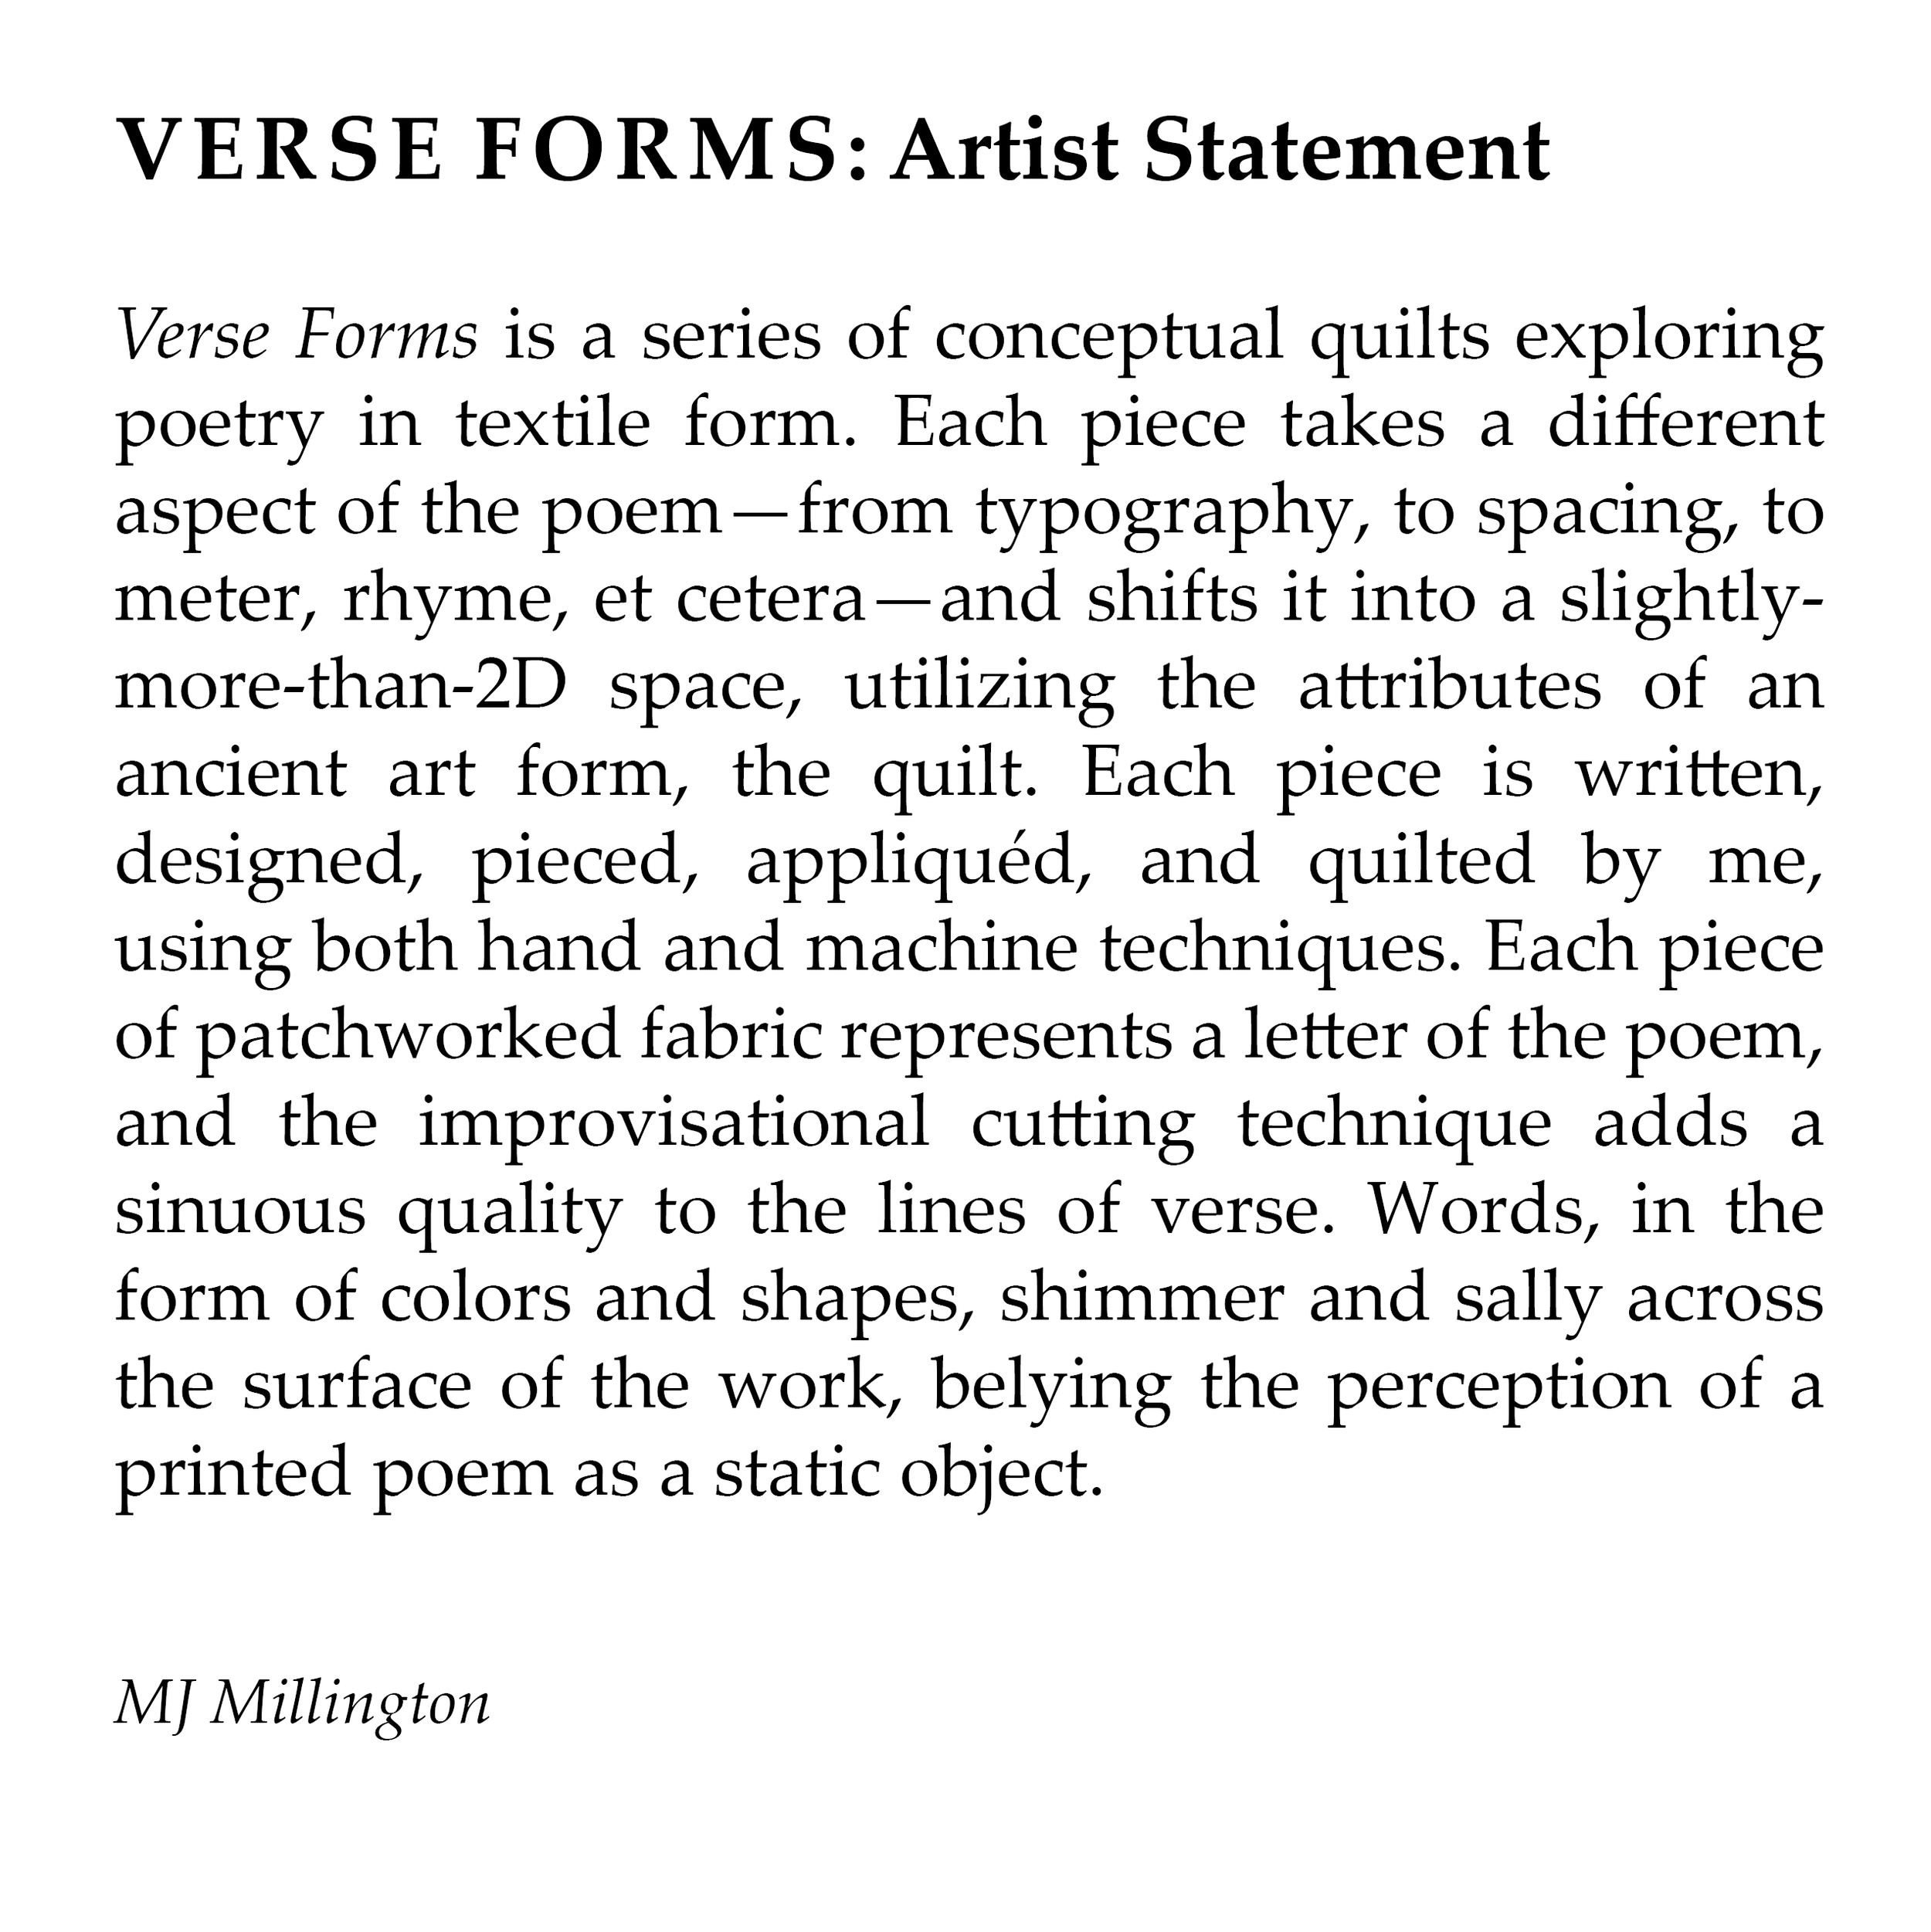 Verse Forms artist statement.png